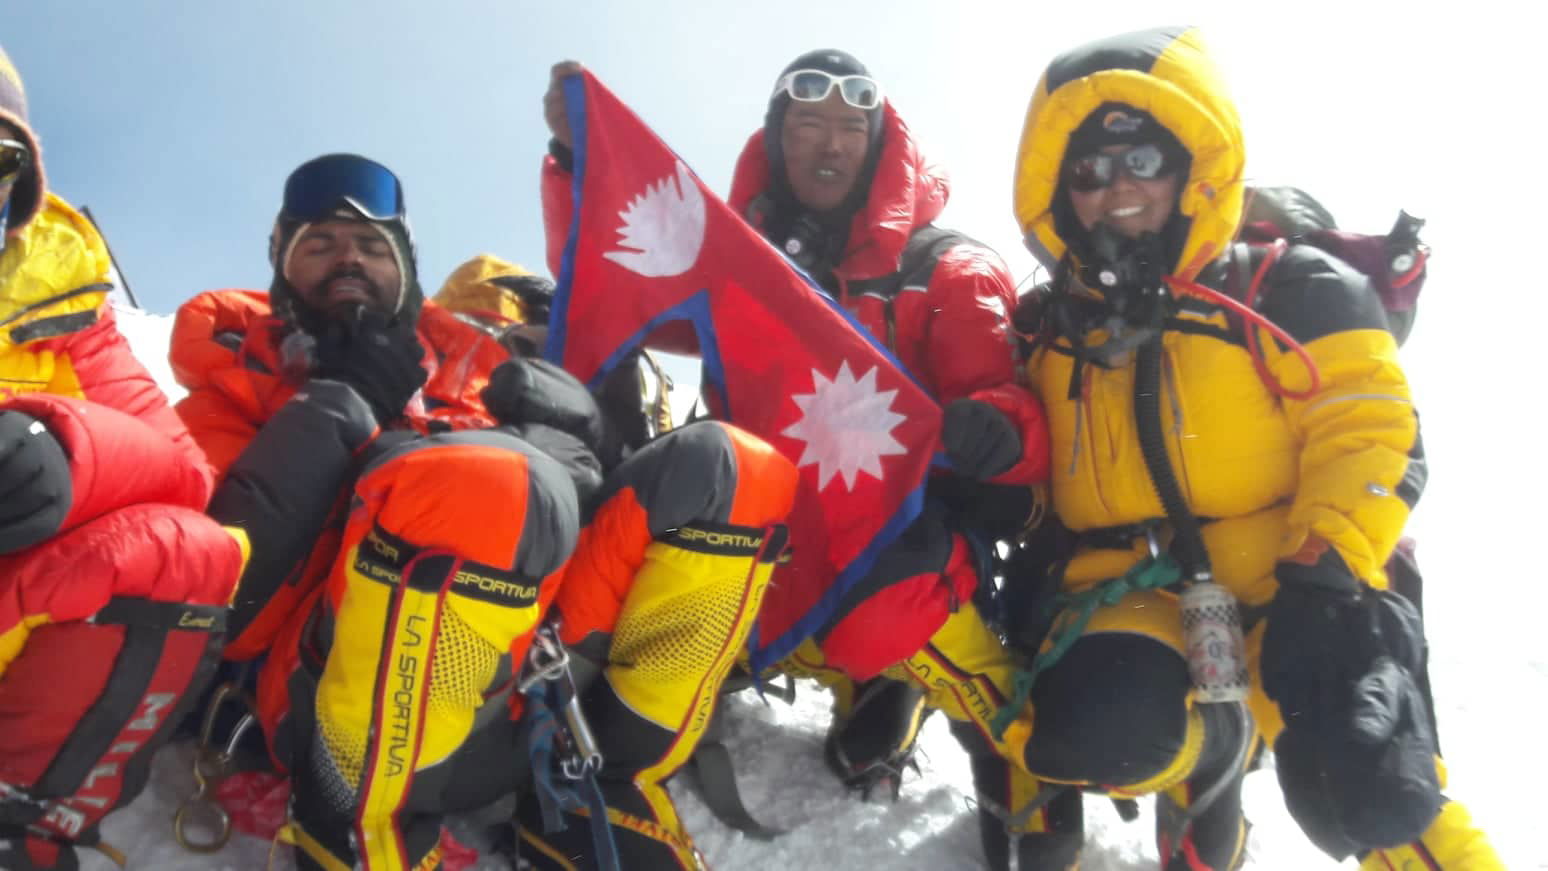 Everest 8848 climbing expedition- 2018